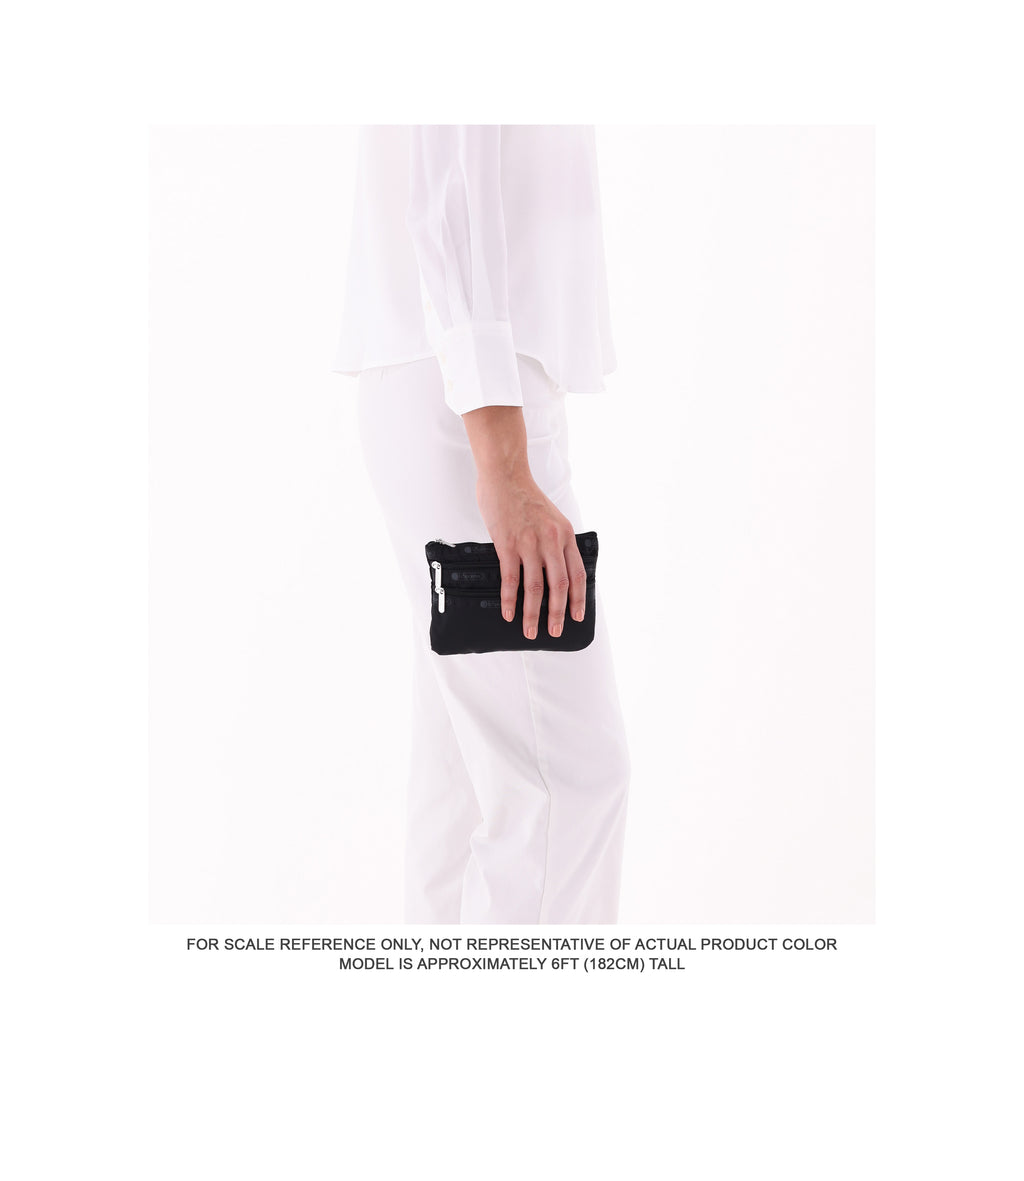 Man Bags - 3 Top Styles To Clutch Onto